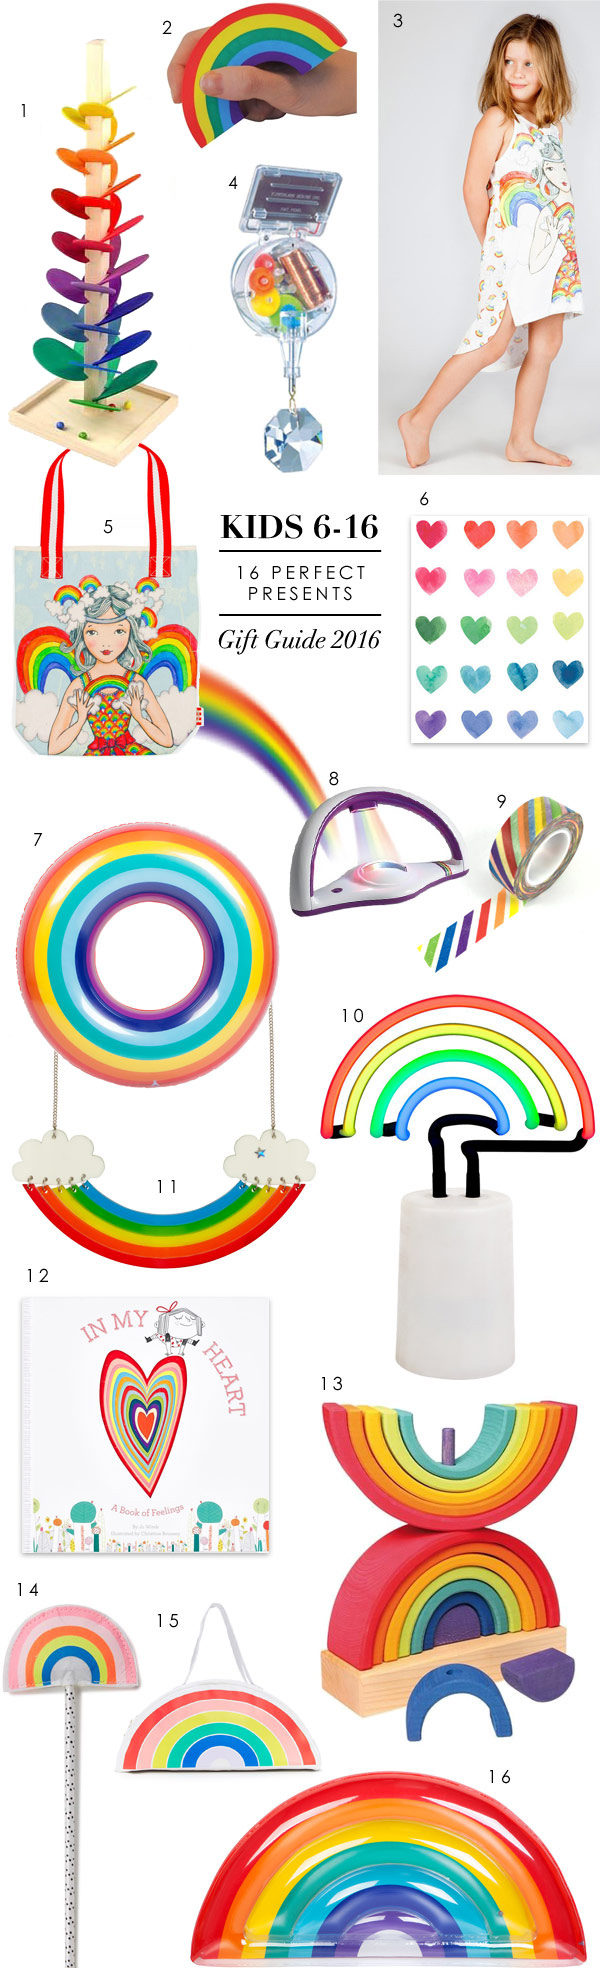 Wee Birdy's ultimate rainbow present gift guide for kids of all ages.